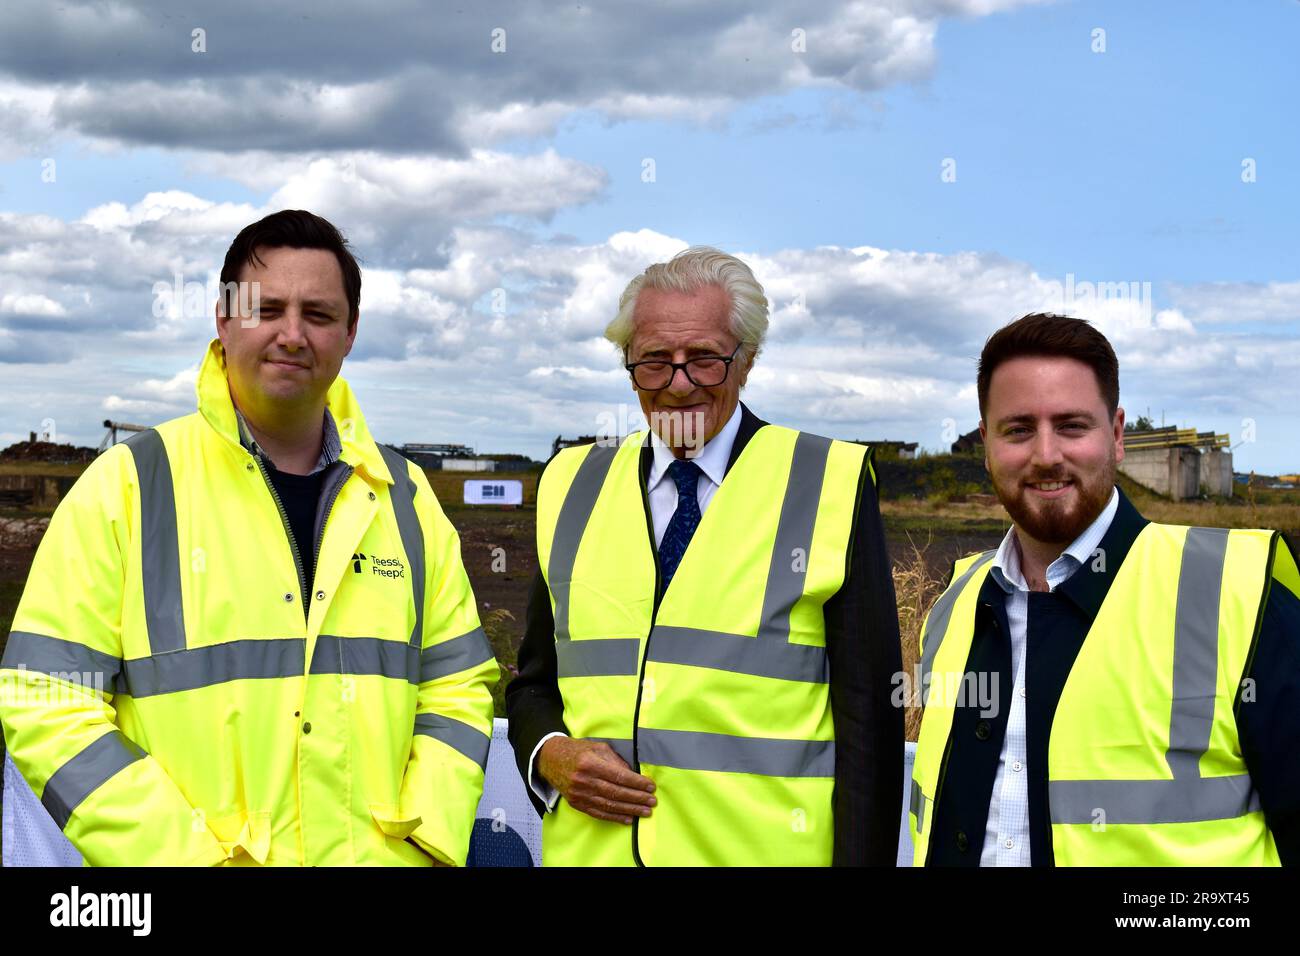 Redcar, UK. 29 Jun 2023. Tees Valley Mayor Ben Houchen, Lord Michael Heseltine and Redcar MP Jacob Young pictured after the final explosive blowdown on the Teesworks site took place. This saw the former Redcar Steelworks Power Station and associated structures demolished - including a triple flare stack, the power station building, chimney, and gas holder, making way for redevelopment. Lord Michael Heseltine pressed the button to trigger the explosive demolition. Tees Valley Mayor Ben Houchen and Redcar MP Jacob Young were also present. The site is part of the Teesside Freeport and is currentl Stock Photo